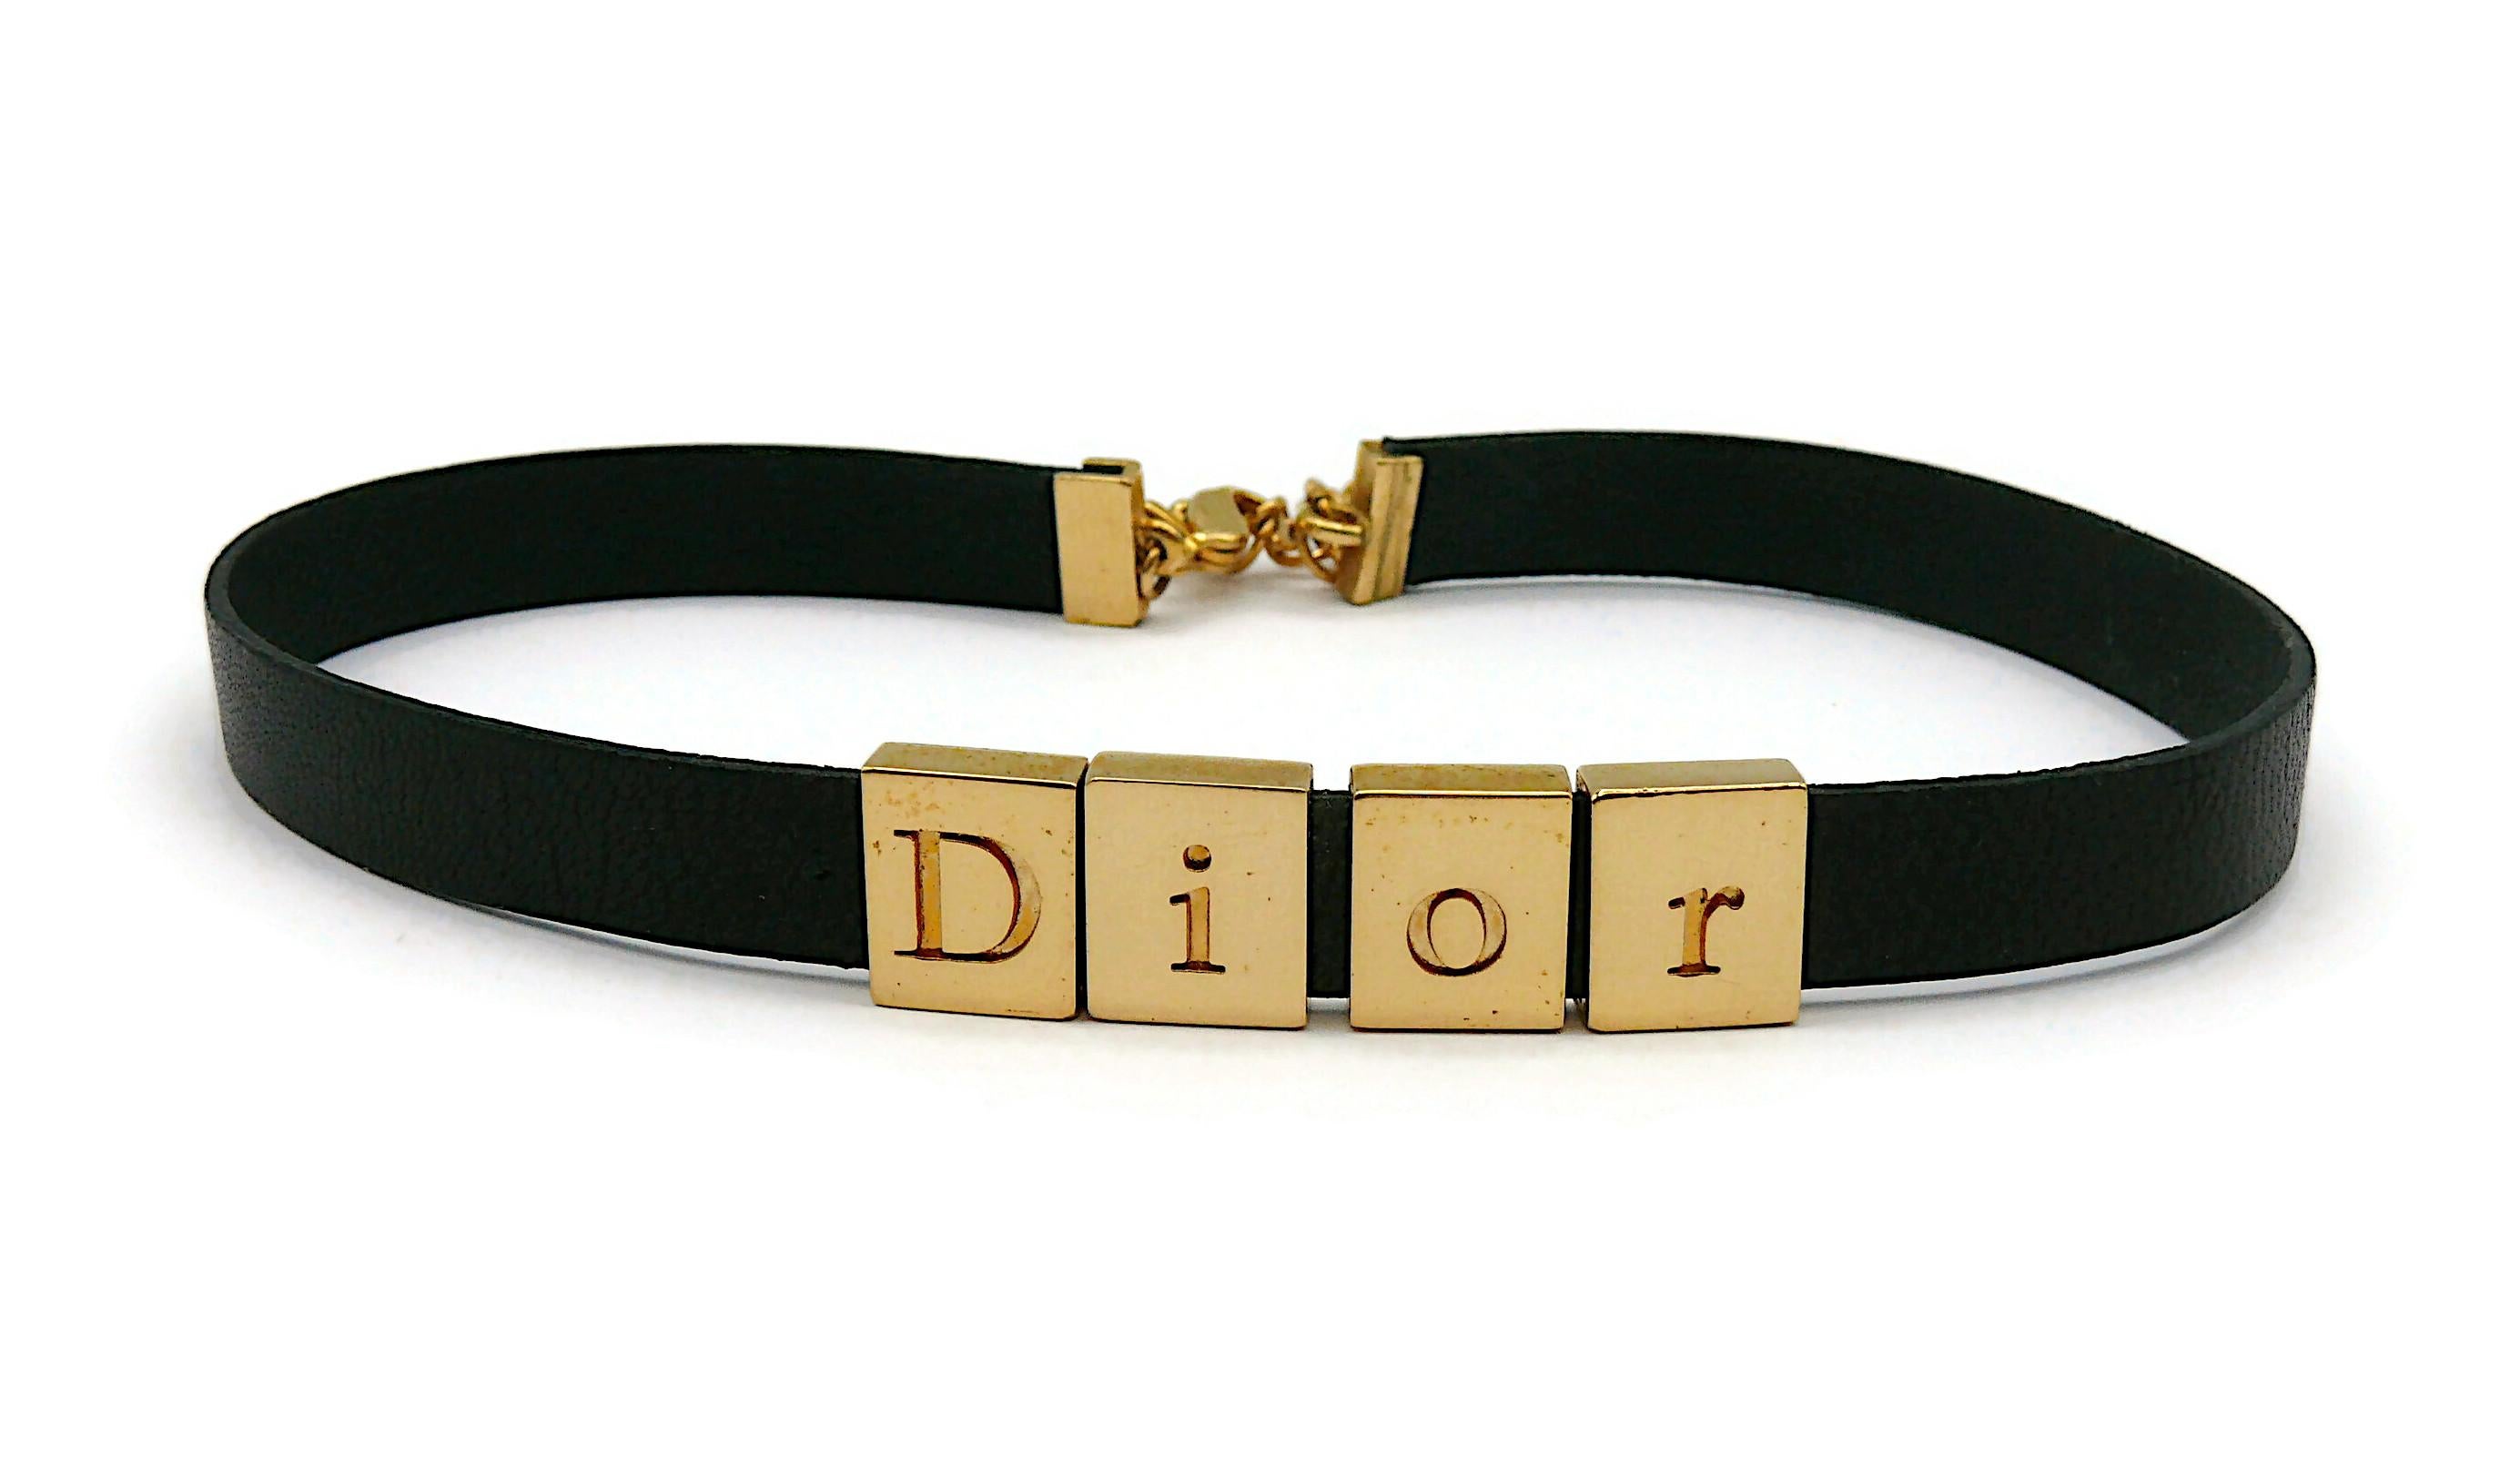 Women's CHRISTIAN DIOR Black Leather D I O R Choker Necklace For Sale